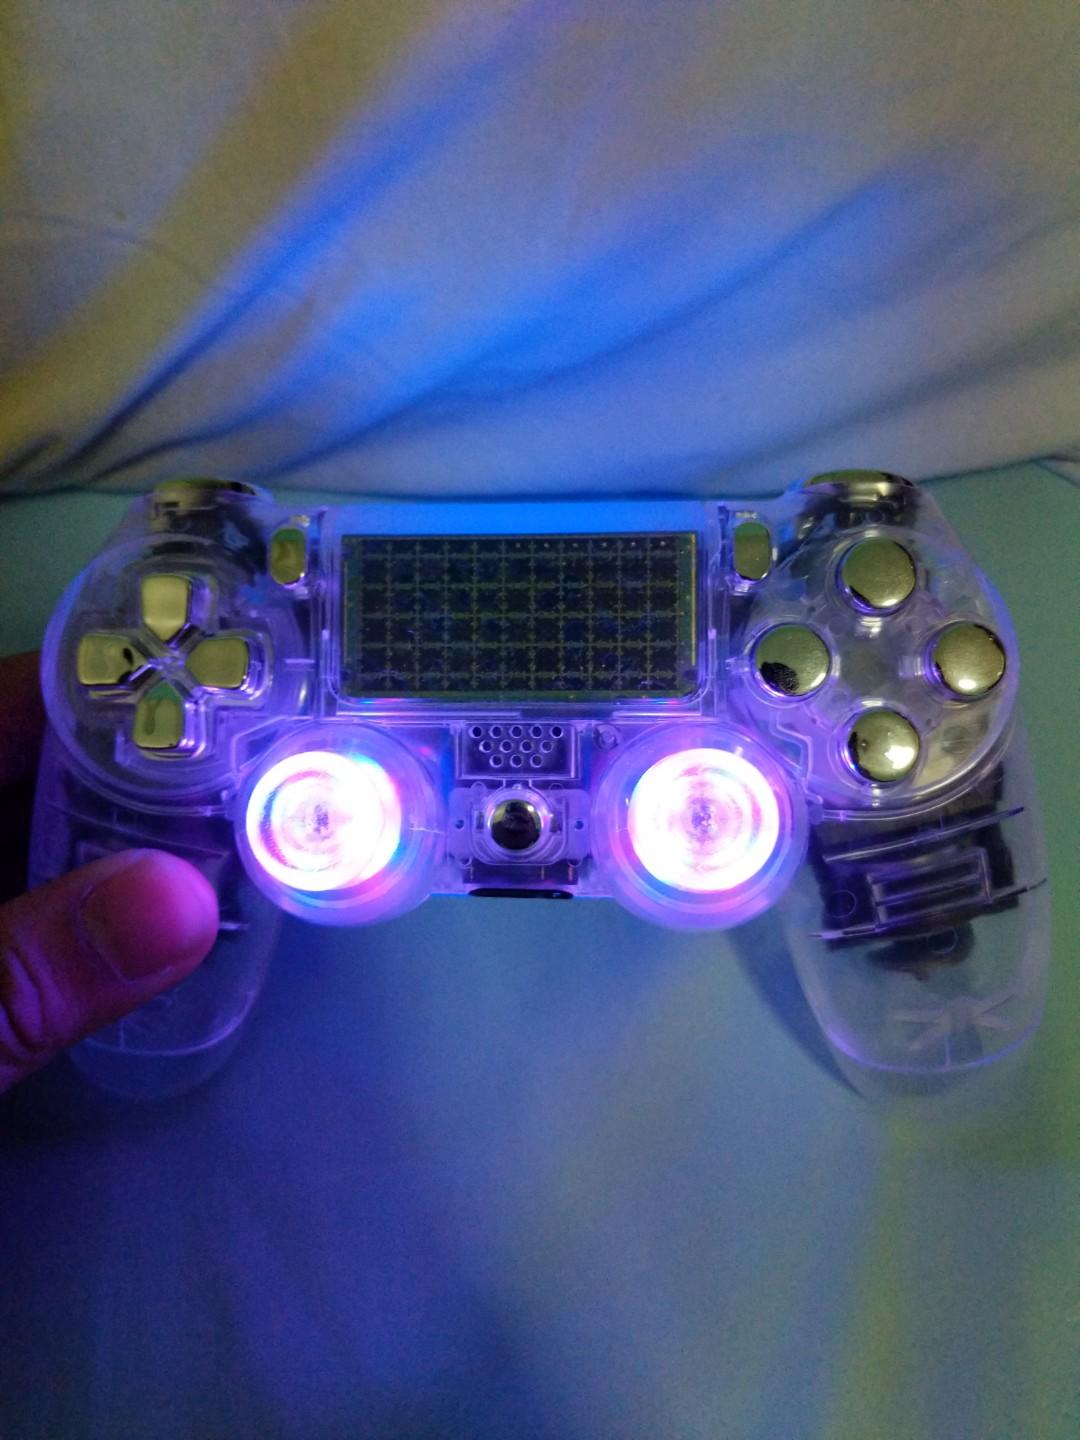 a modded ps4 controller